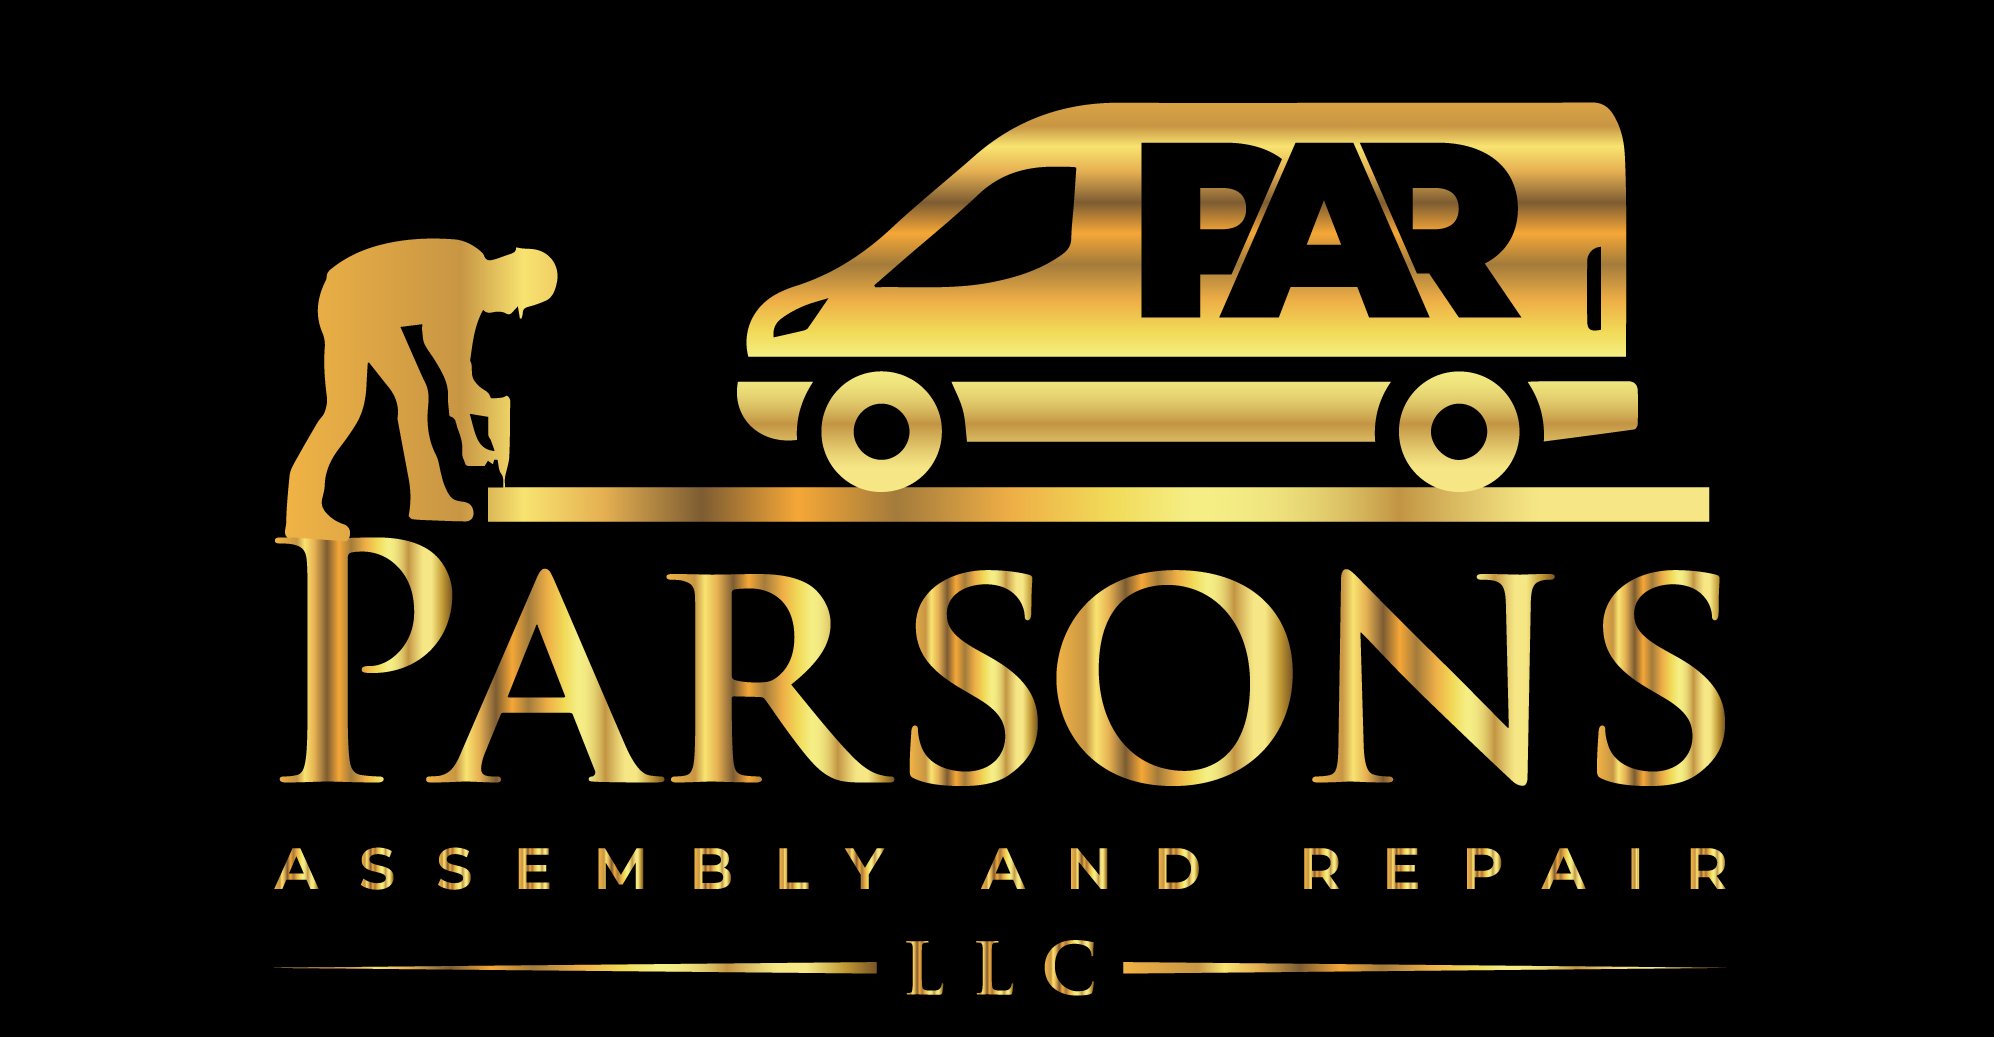 Parsons Assembly and Repair LLC